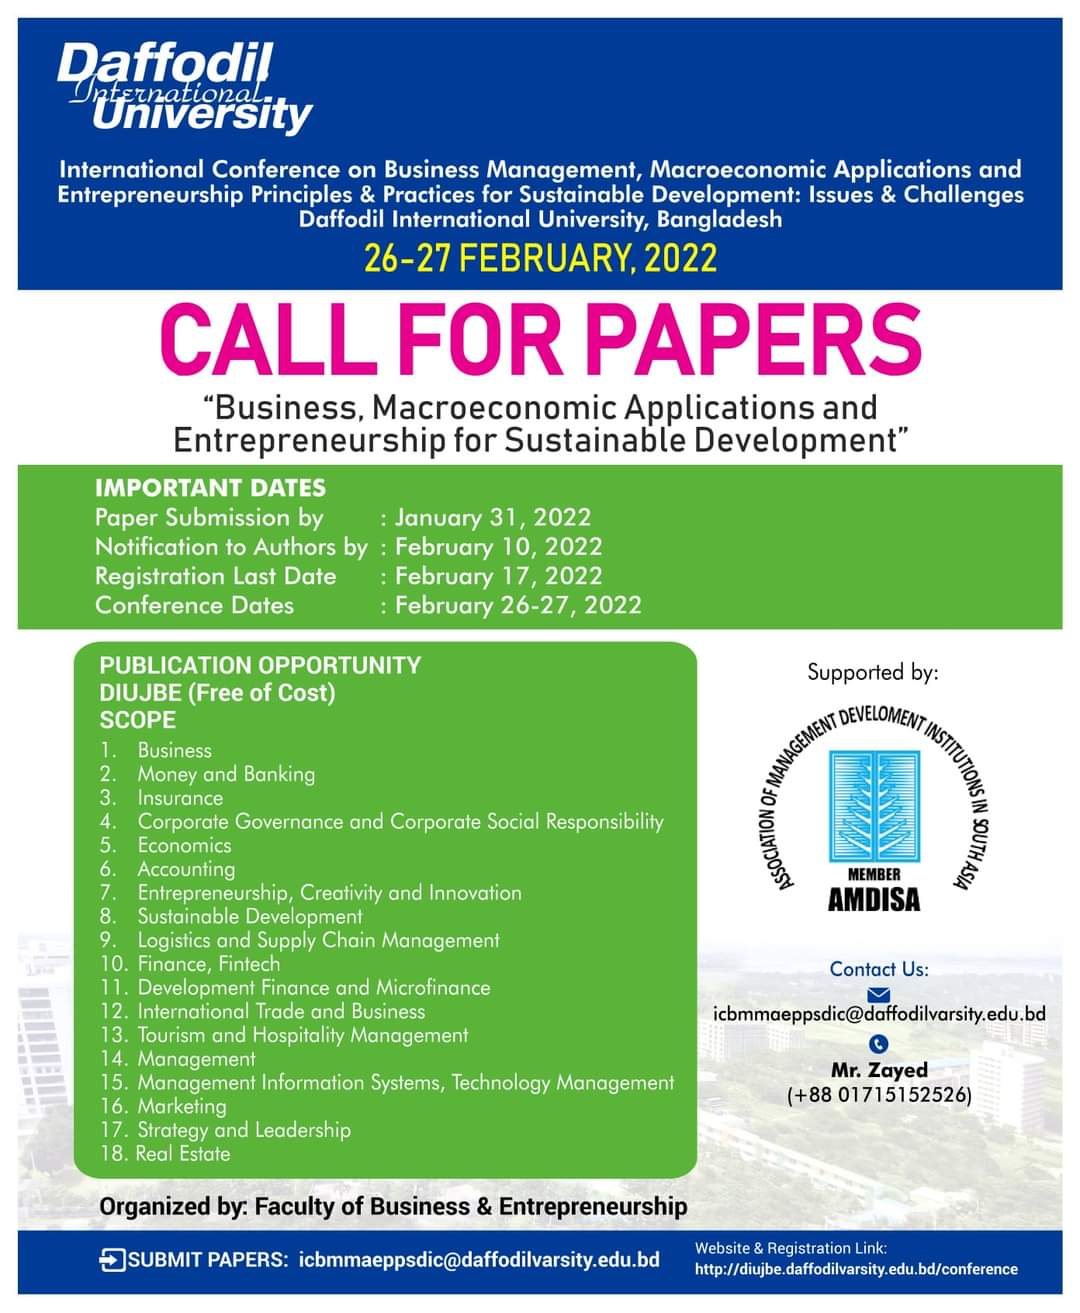 Call for Papers FBE, DIU